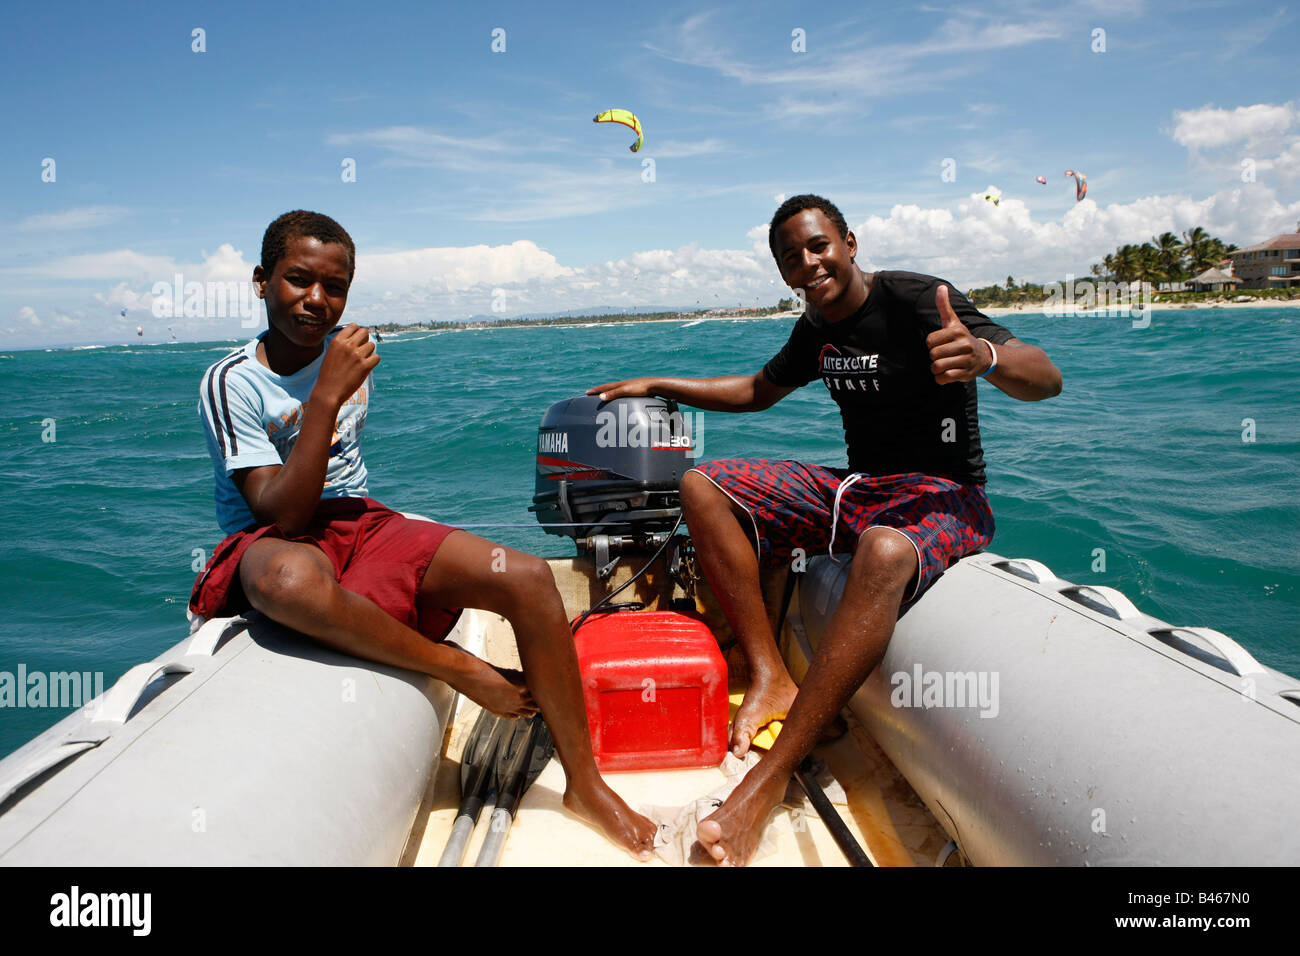 Dominican Boat Boy Stock Photos &amp; Dominican Boat Boy Stock ...